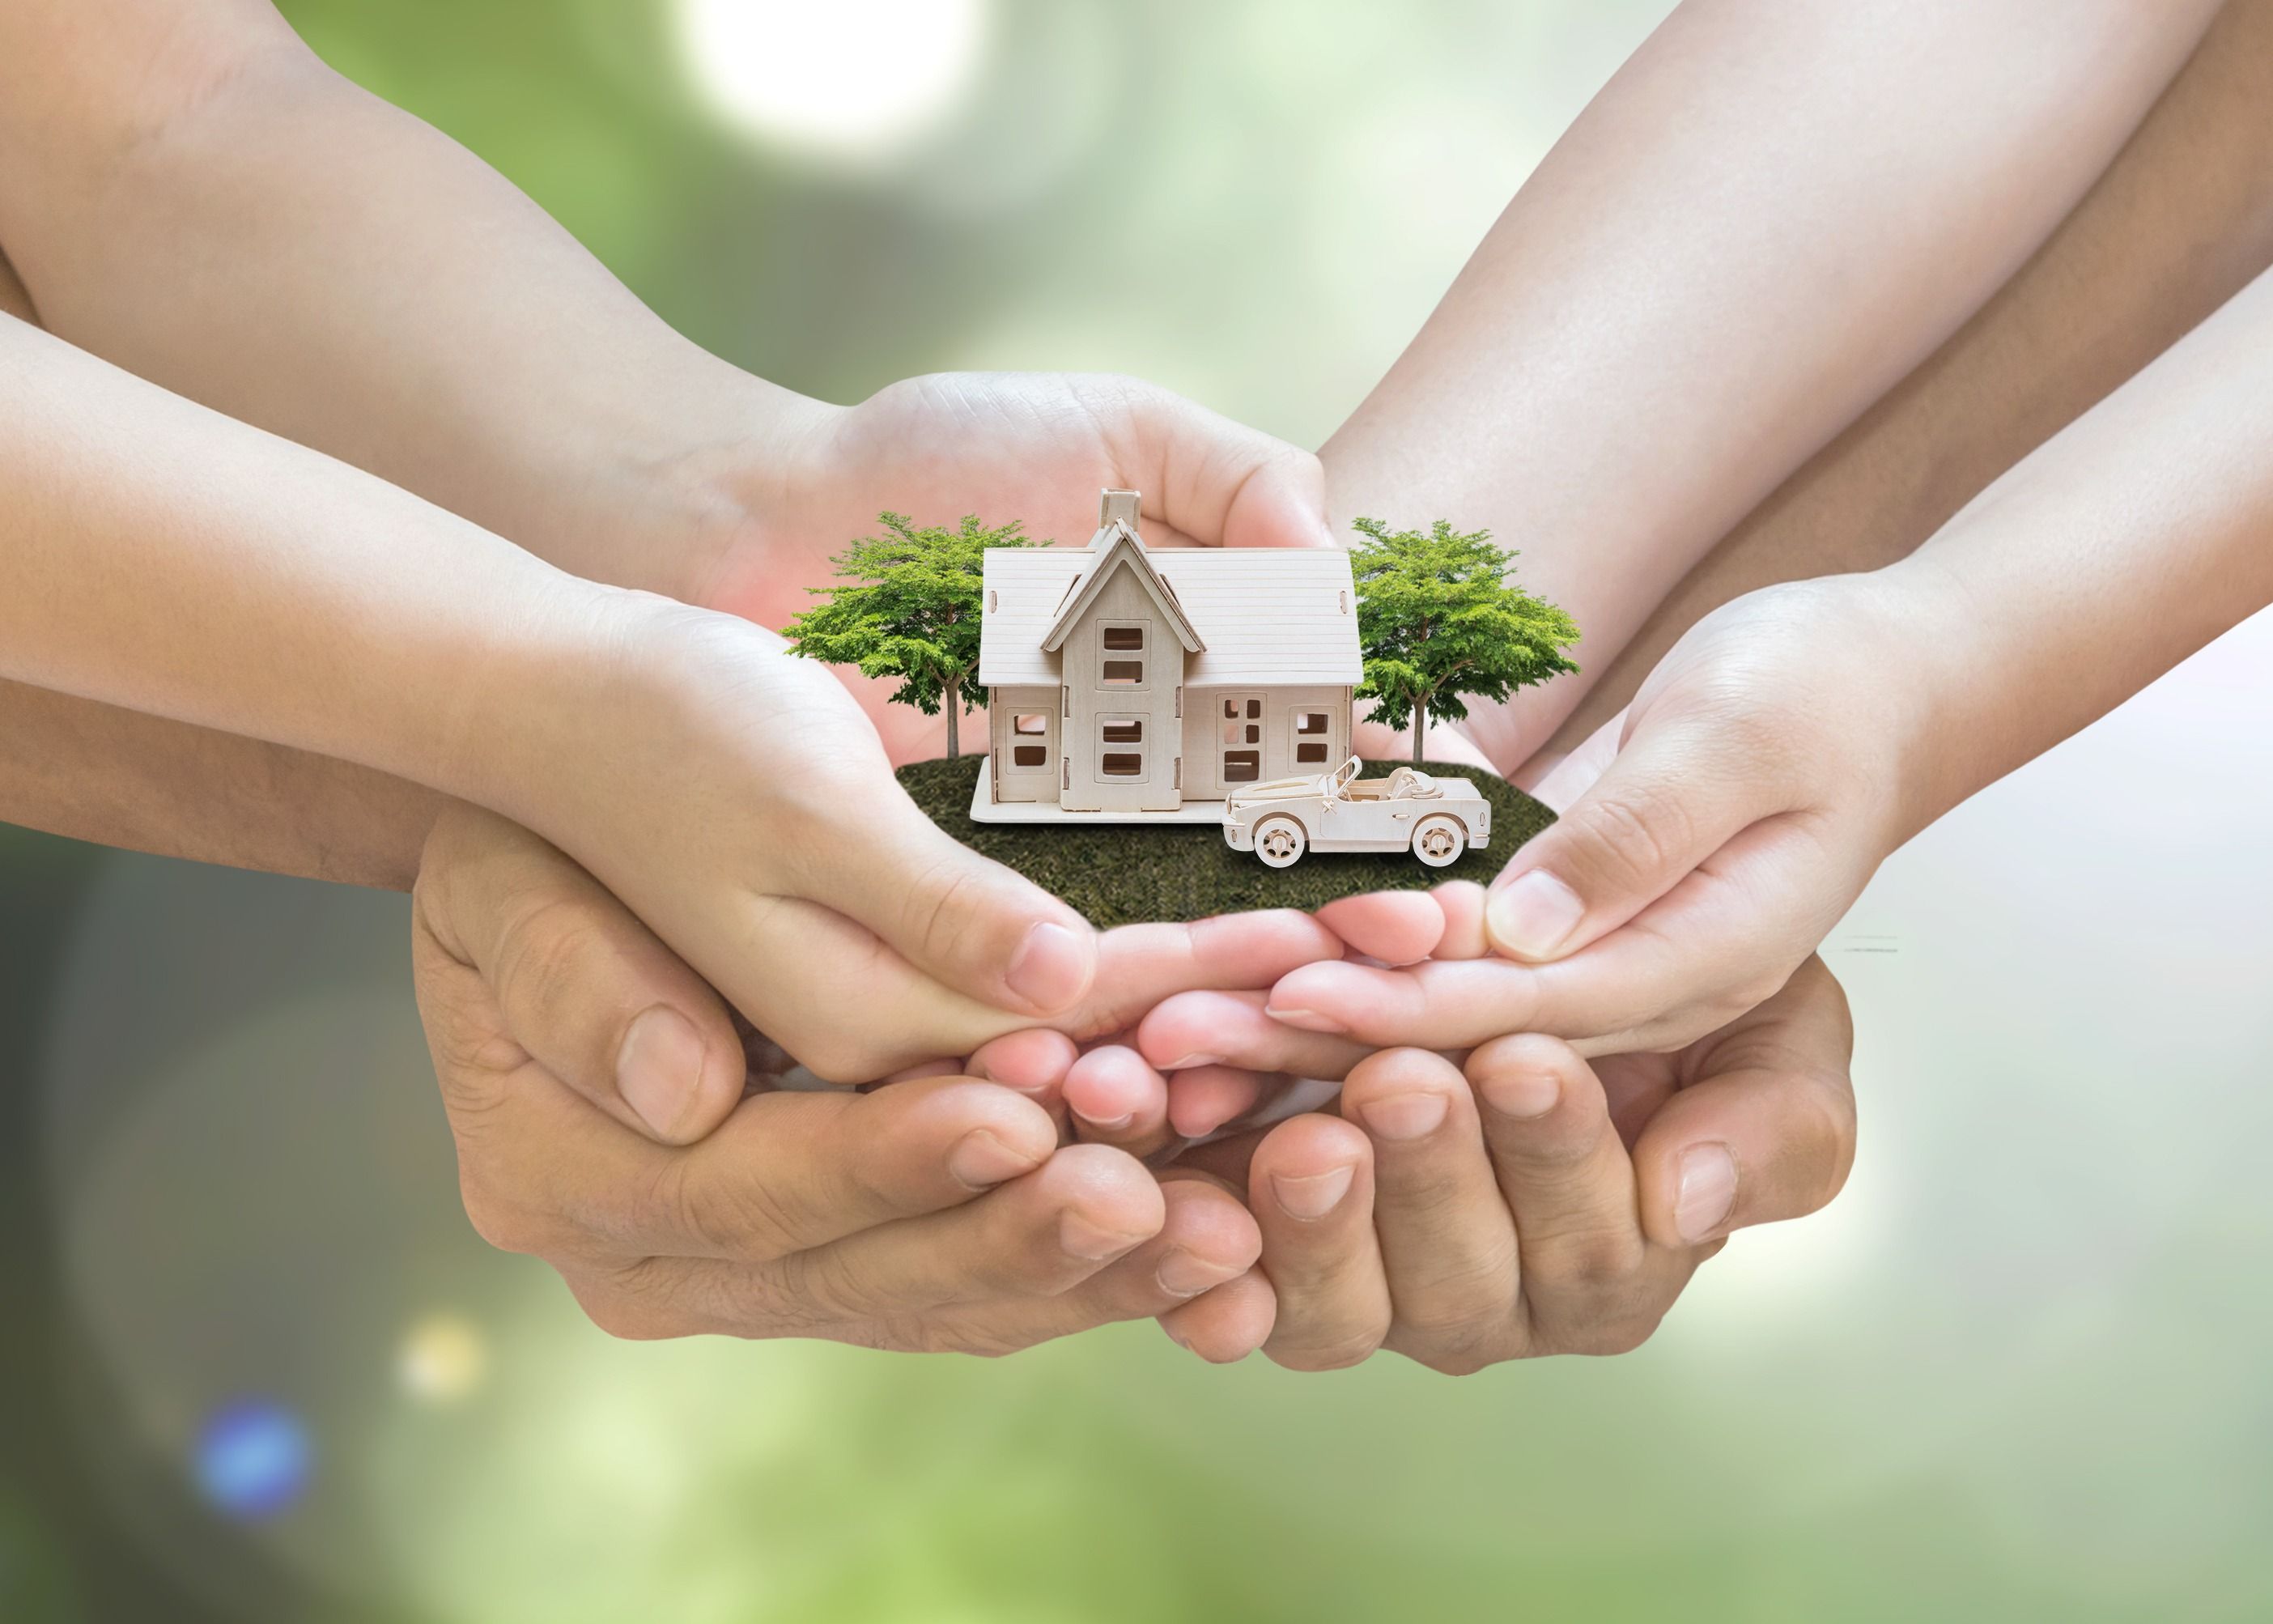 Home_loan,_car_insurance,_family_life_assurance_protection,_financial_mortgage_for_house_building,_and_legacy_planning_investment_concept_with_children_-_parent's_hands_holding_private_property